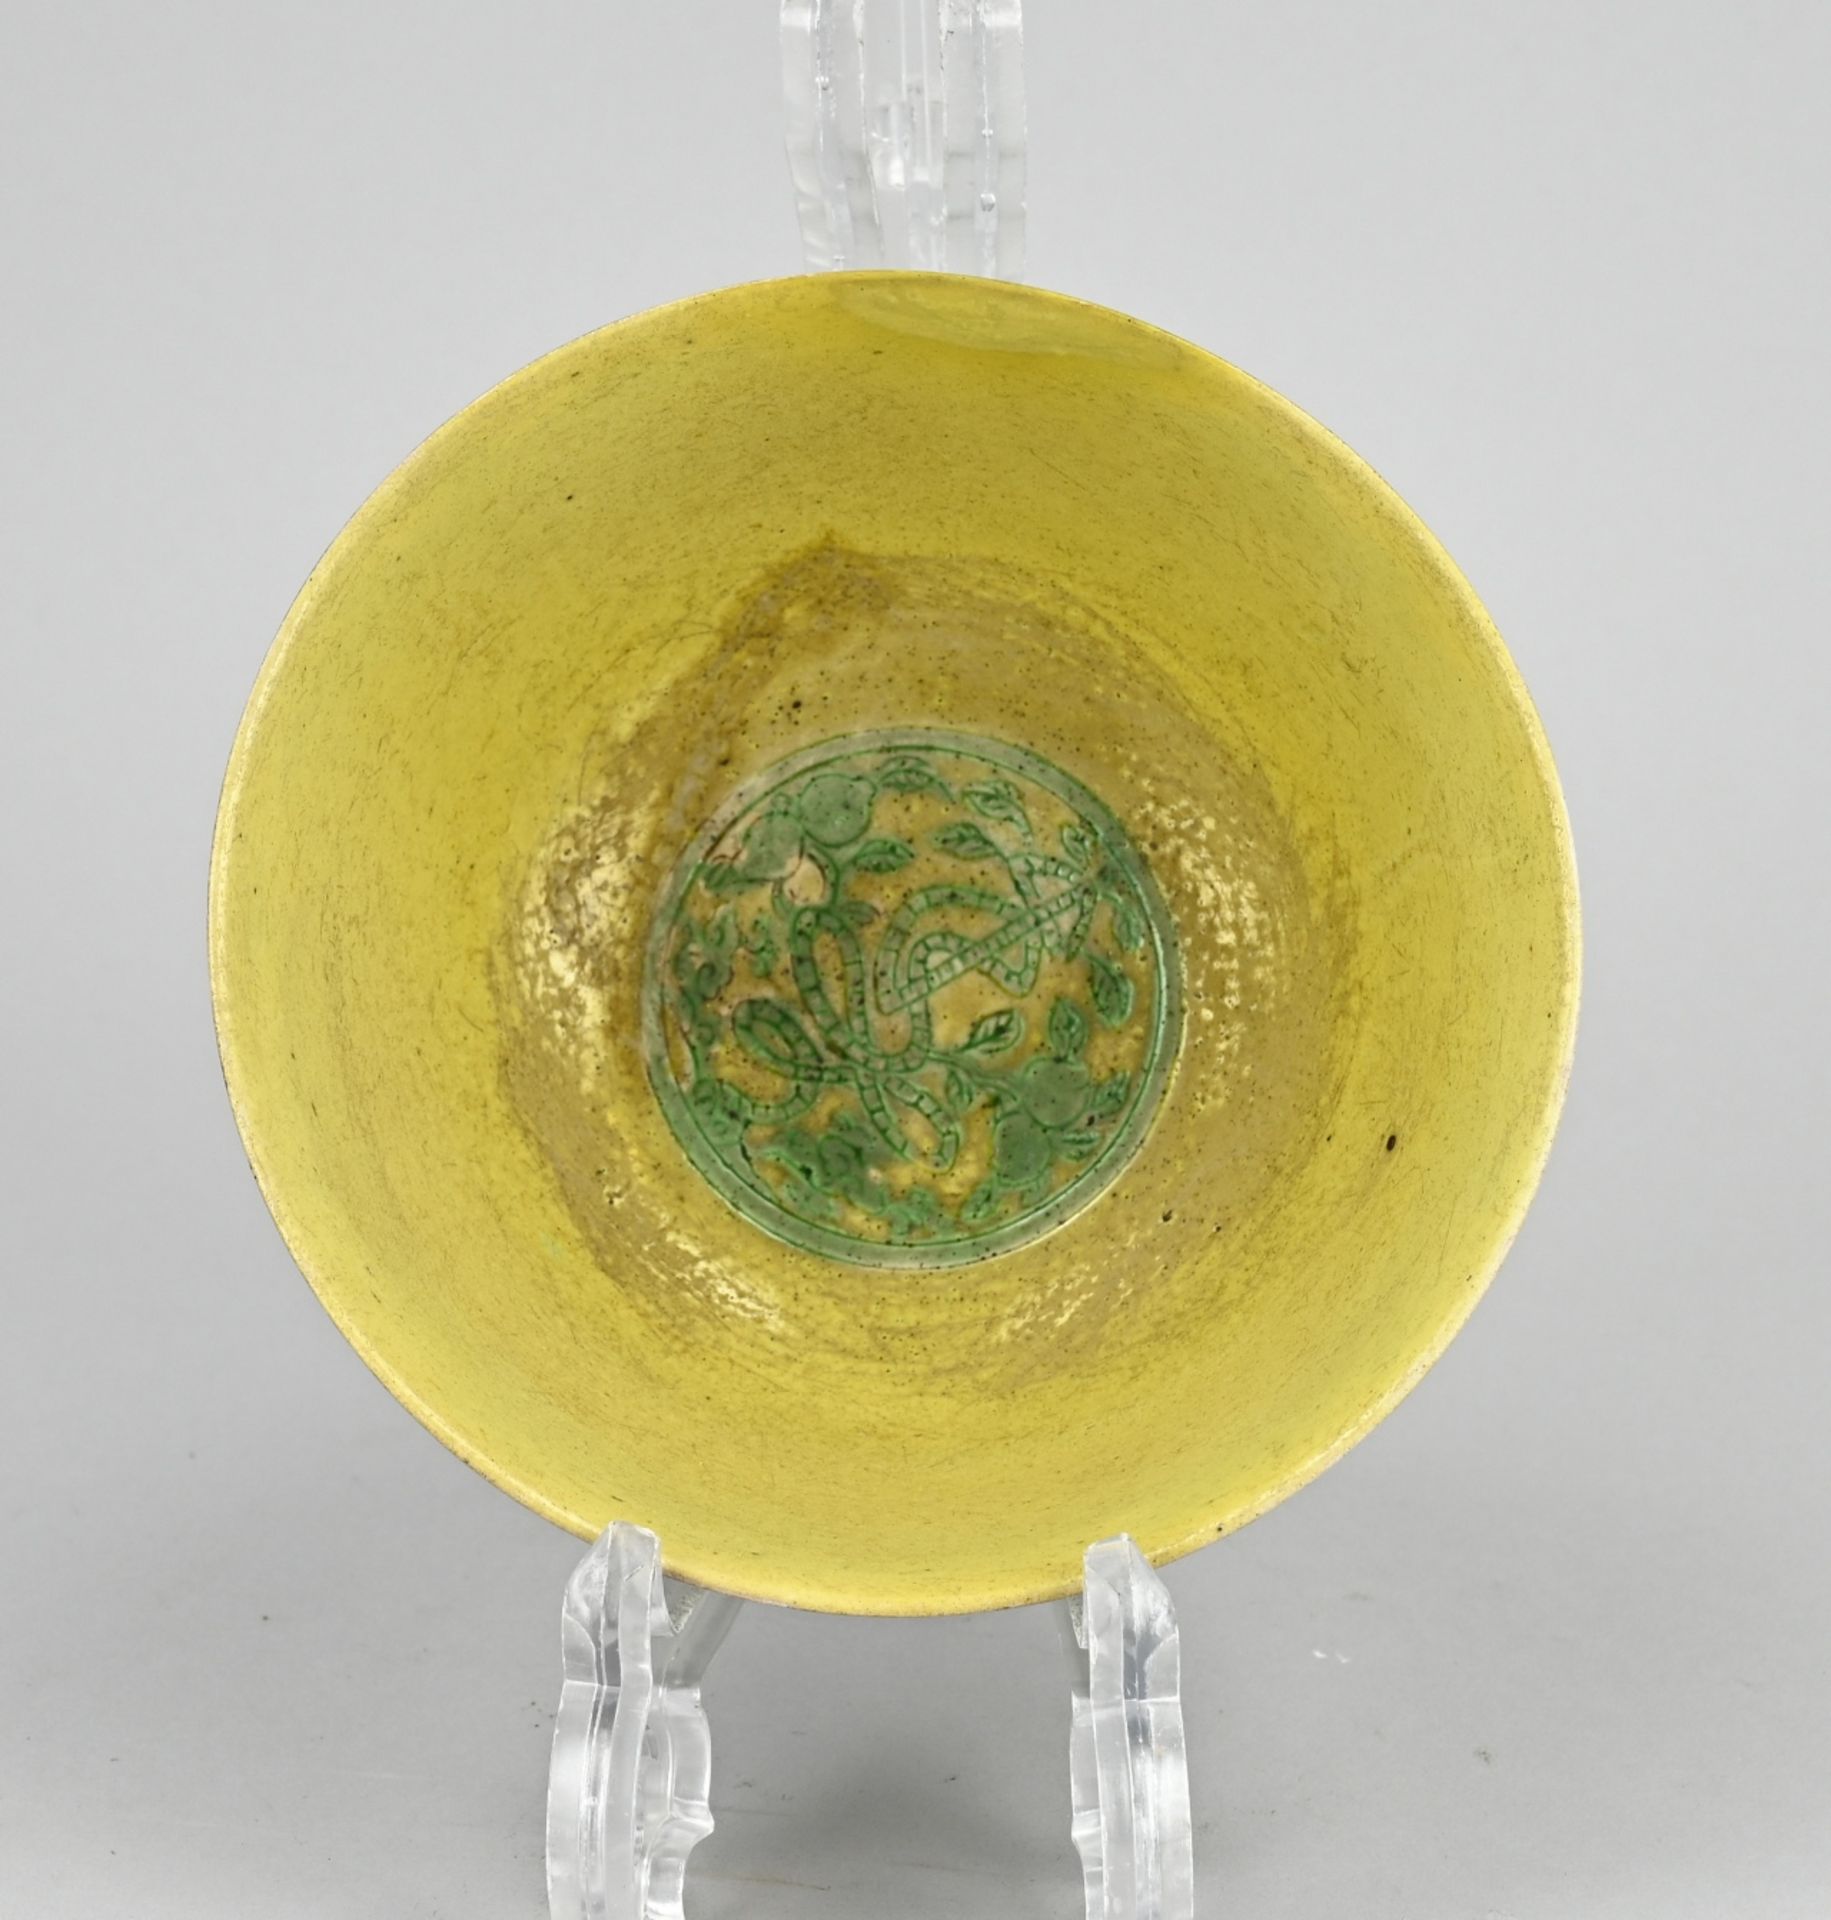 Chinese yellow bowl with green dragon - Image 2 of 3